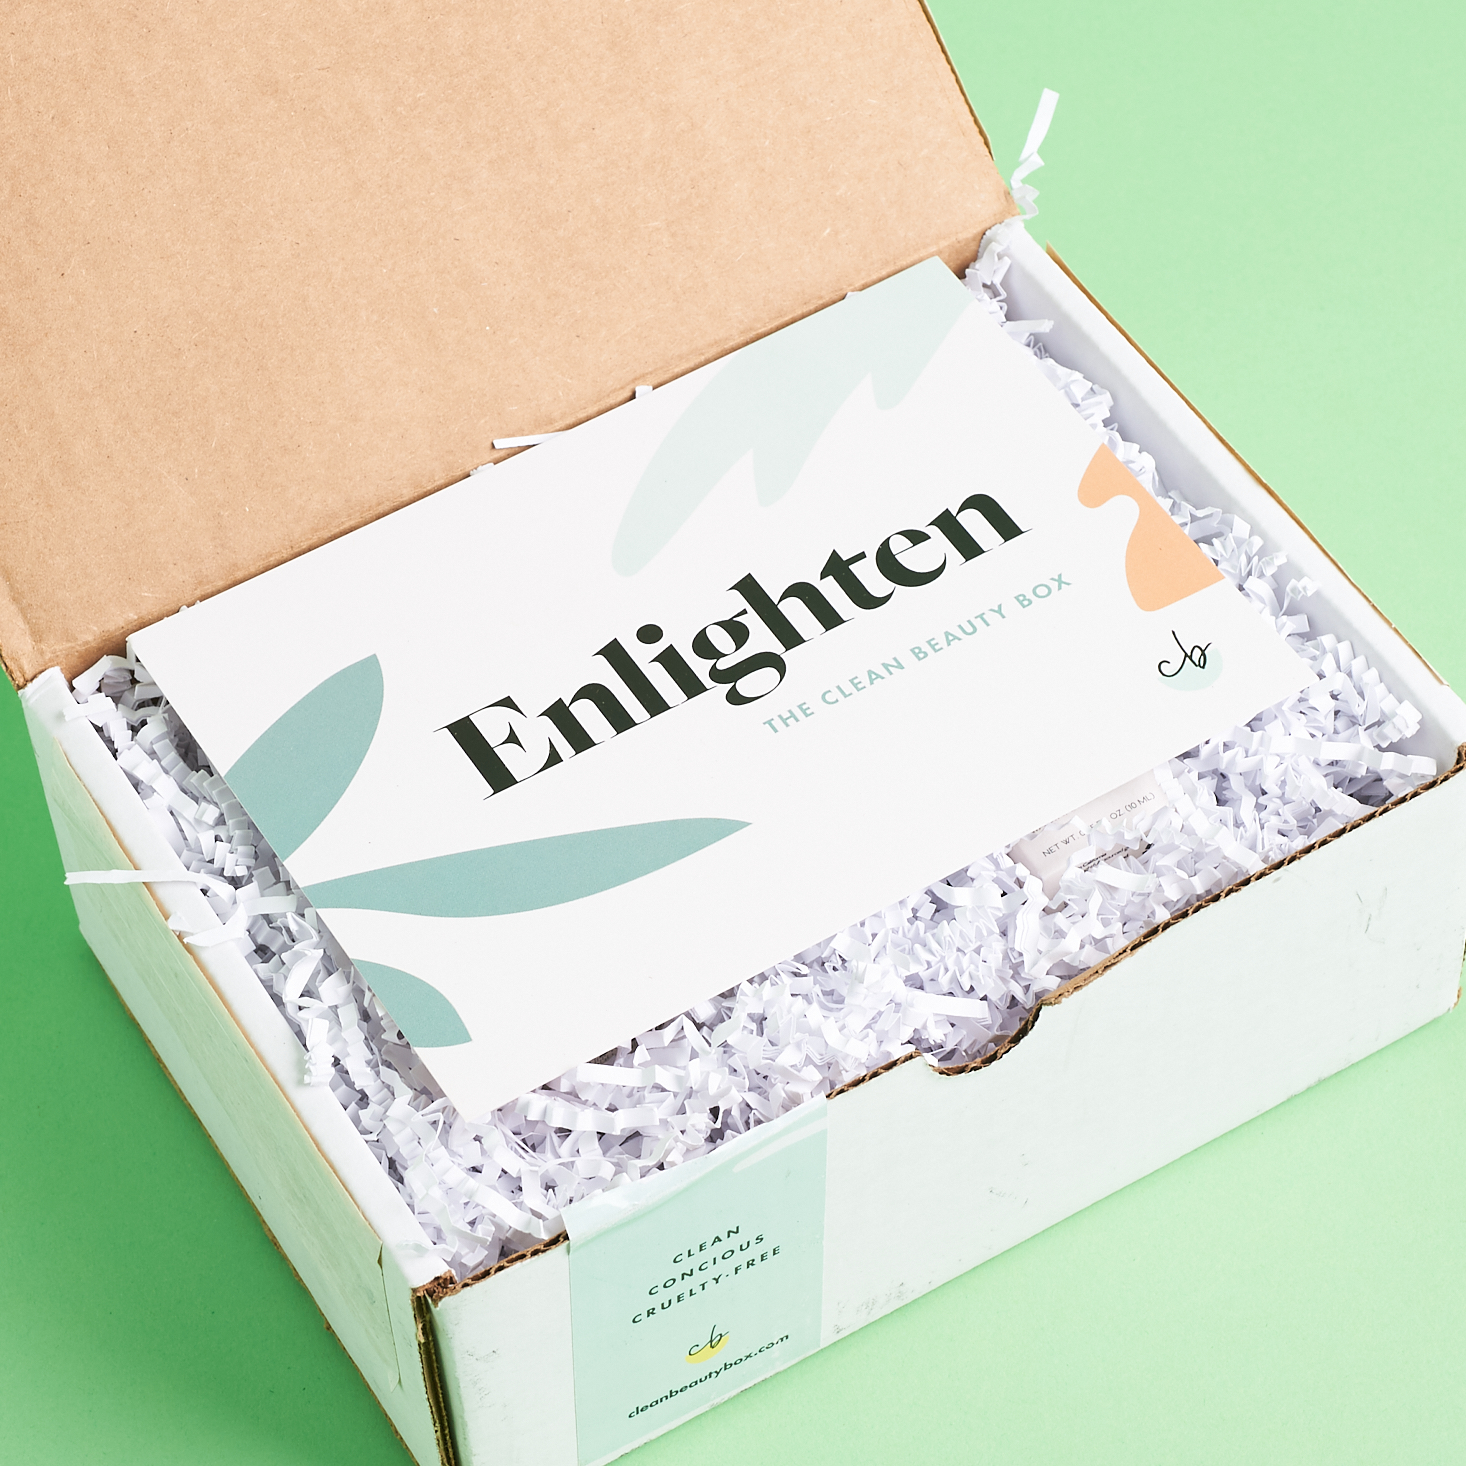 The Clean Beauty Box Limited Edition ‘Enlighten’ Box Review